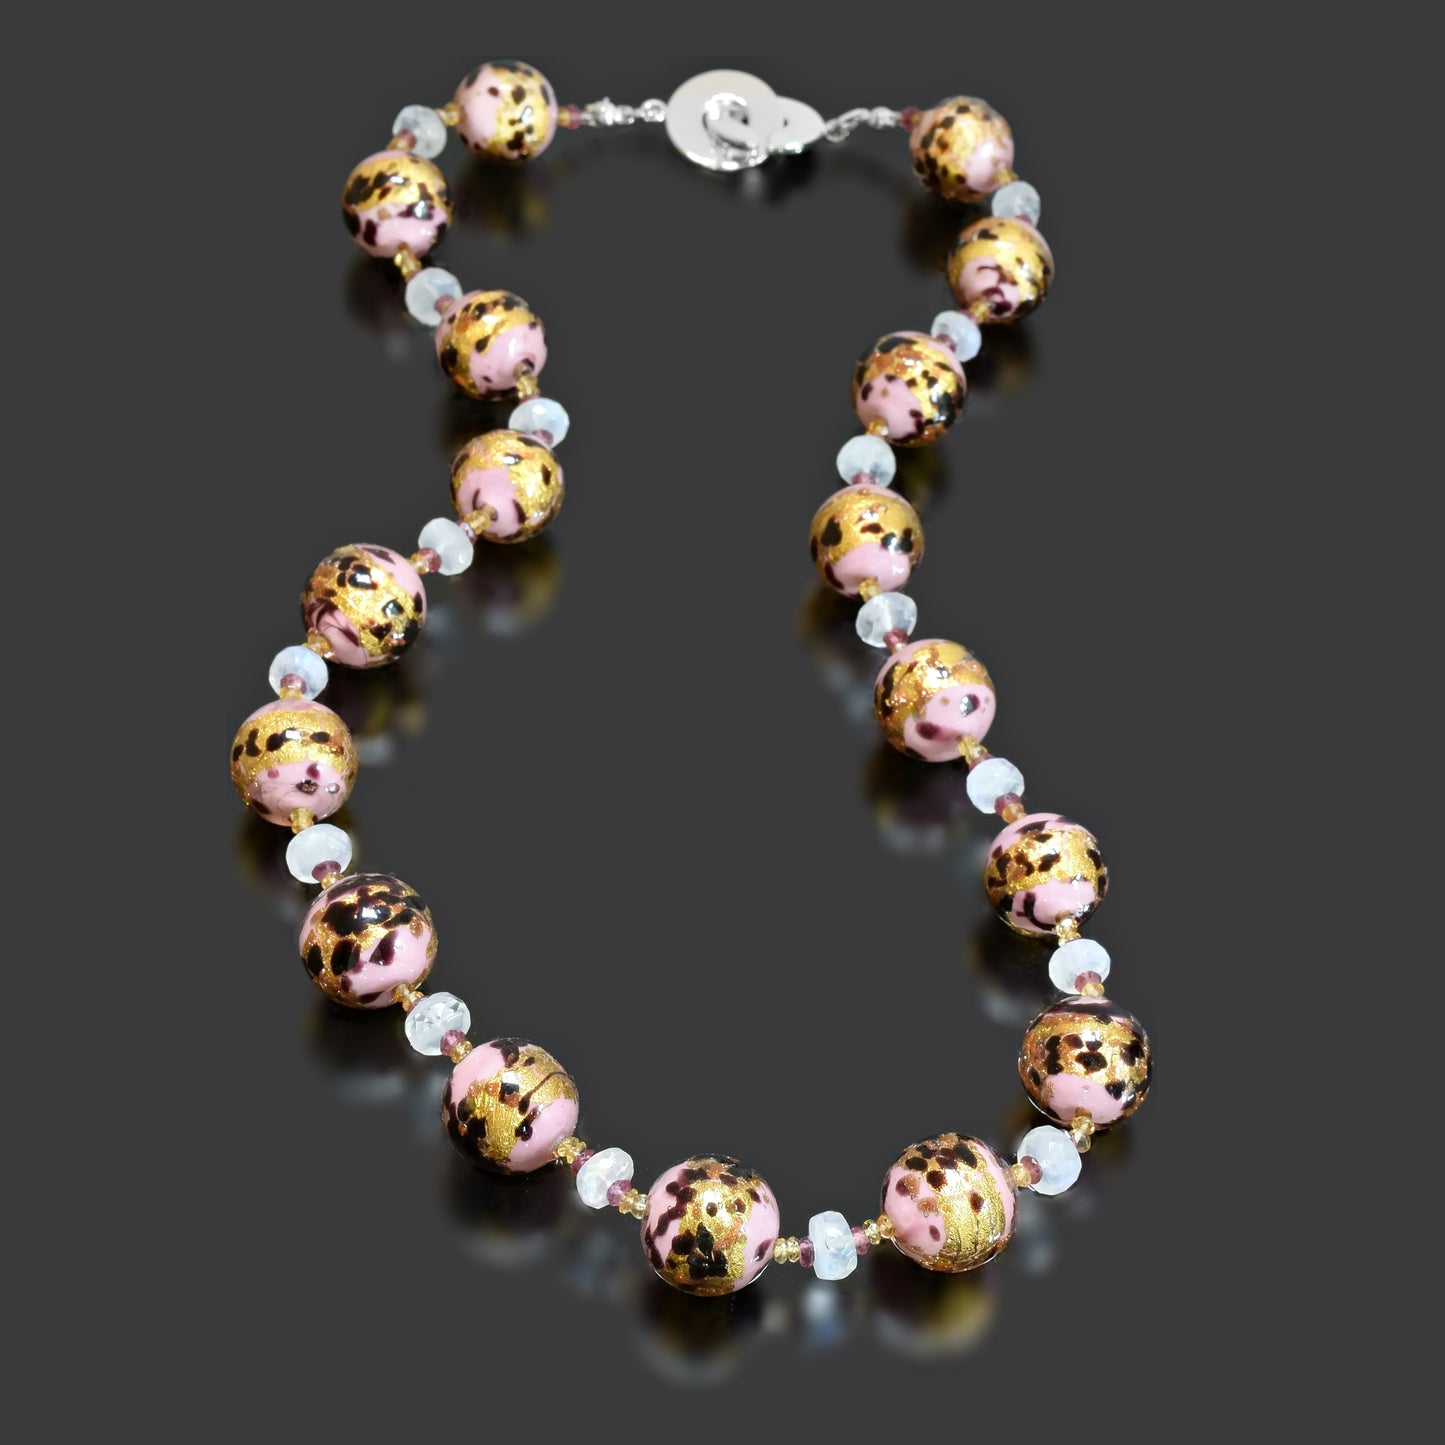 Leopard Pink Round Murano Bead Necklace with Moonstone, Citrine & Garnet Sterling Silver 